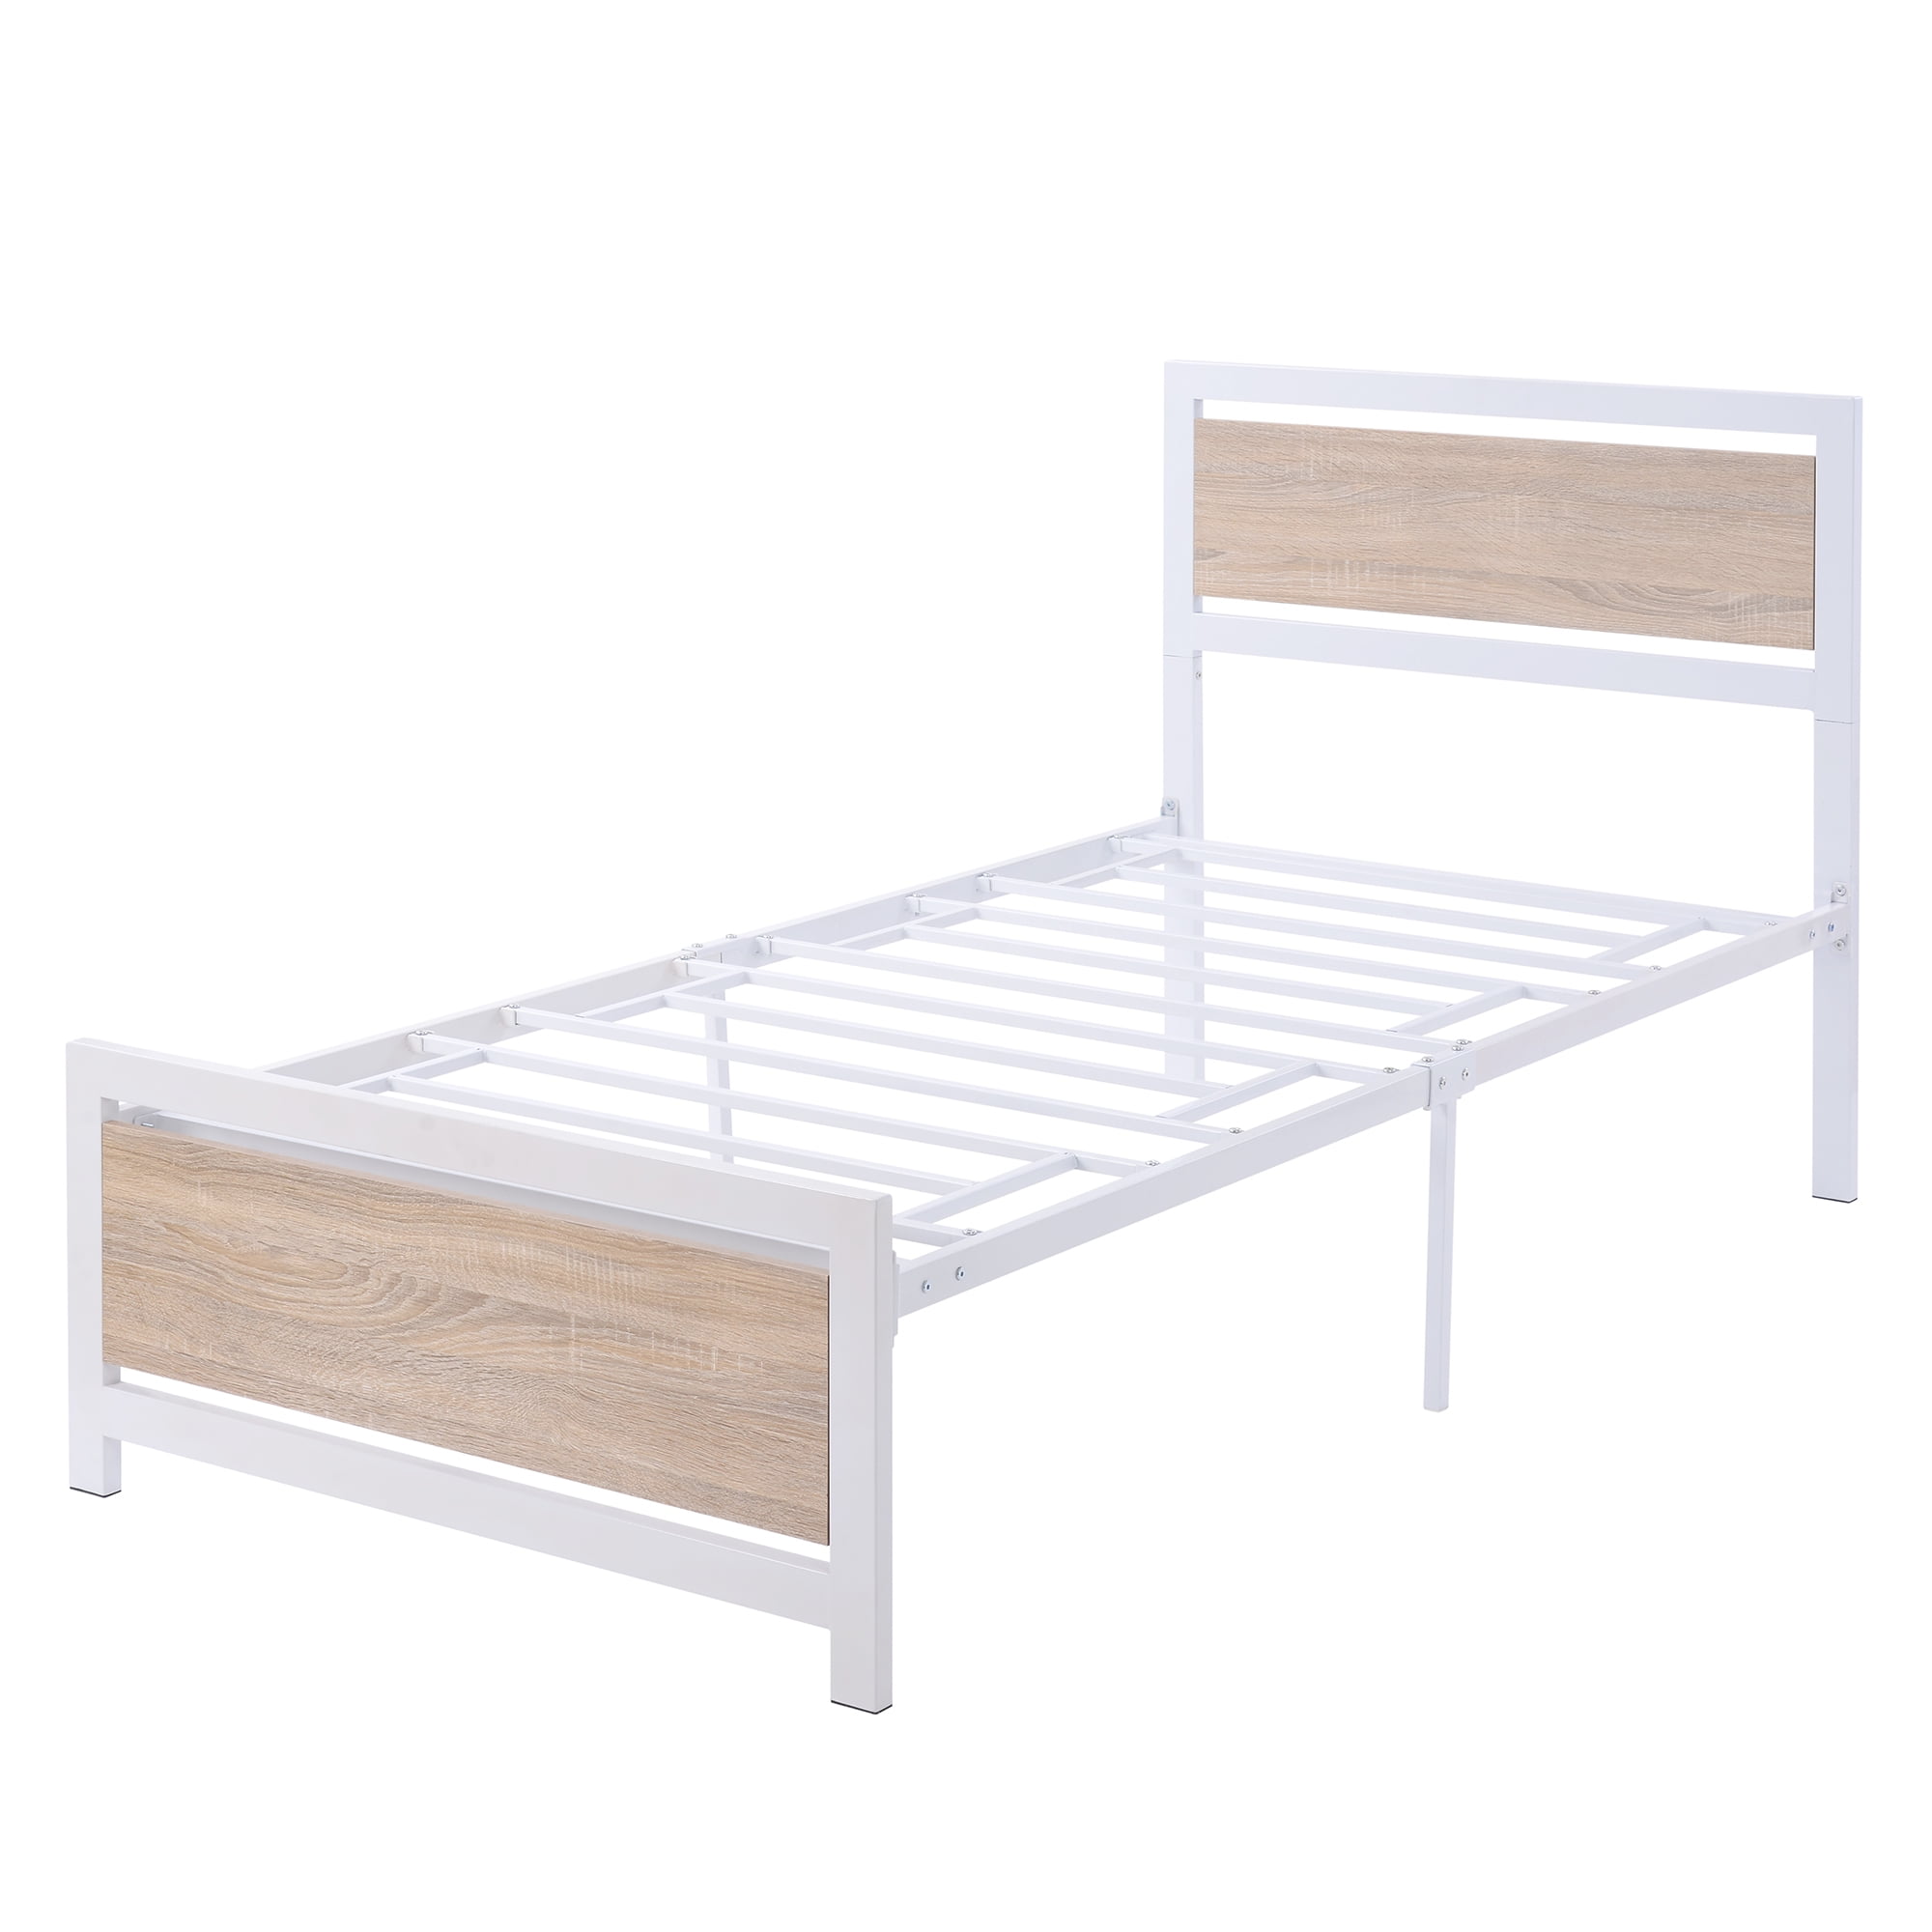 Metal And Wood Bed Frame With Headboard, Platform Bed Frame That Attaches To Headboard And Footboard